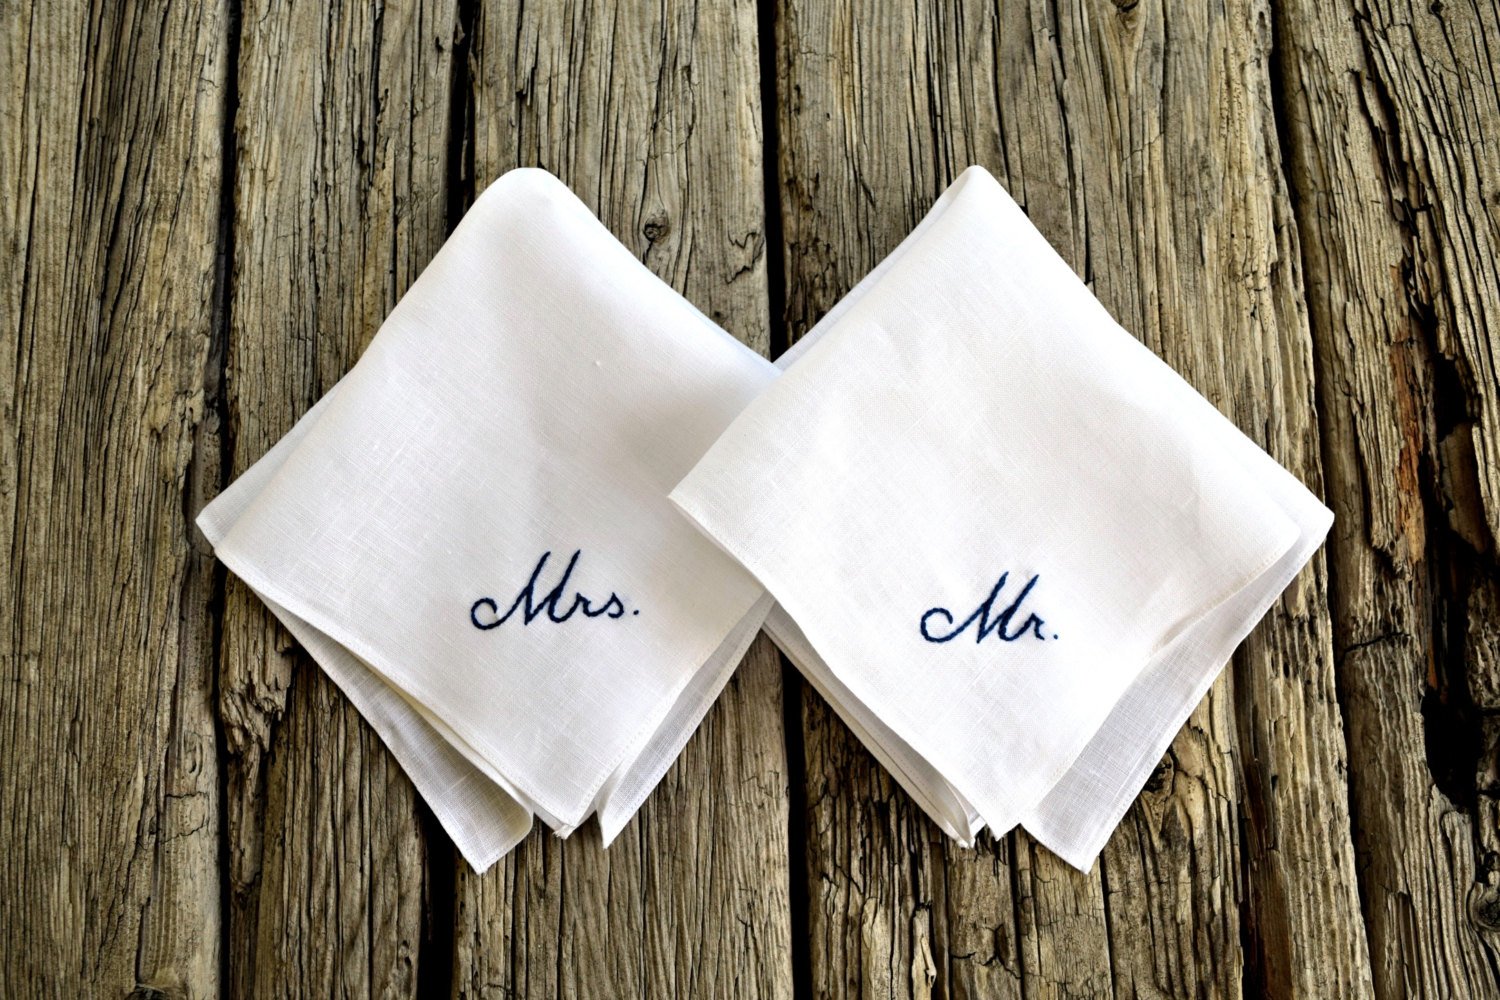 Pair of white linen handkerchiefs - one embroidered Mrs. and one with Mr. 